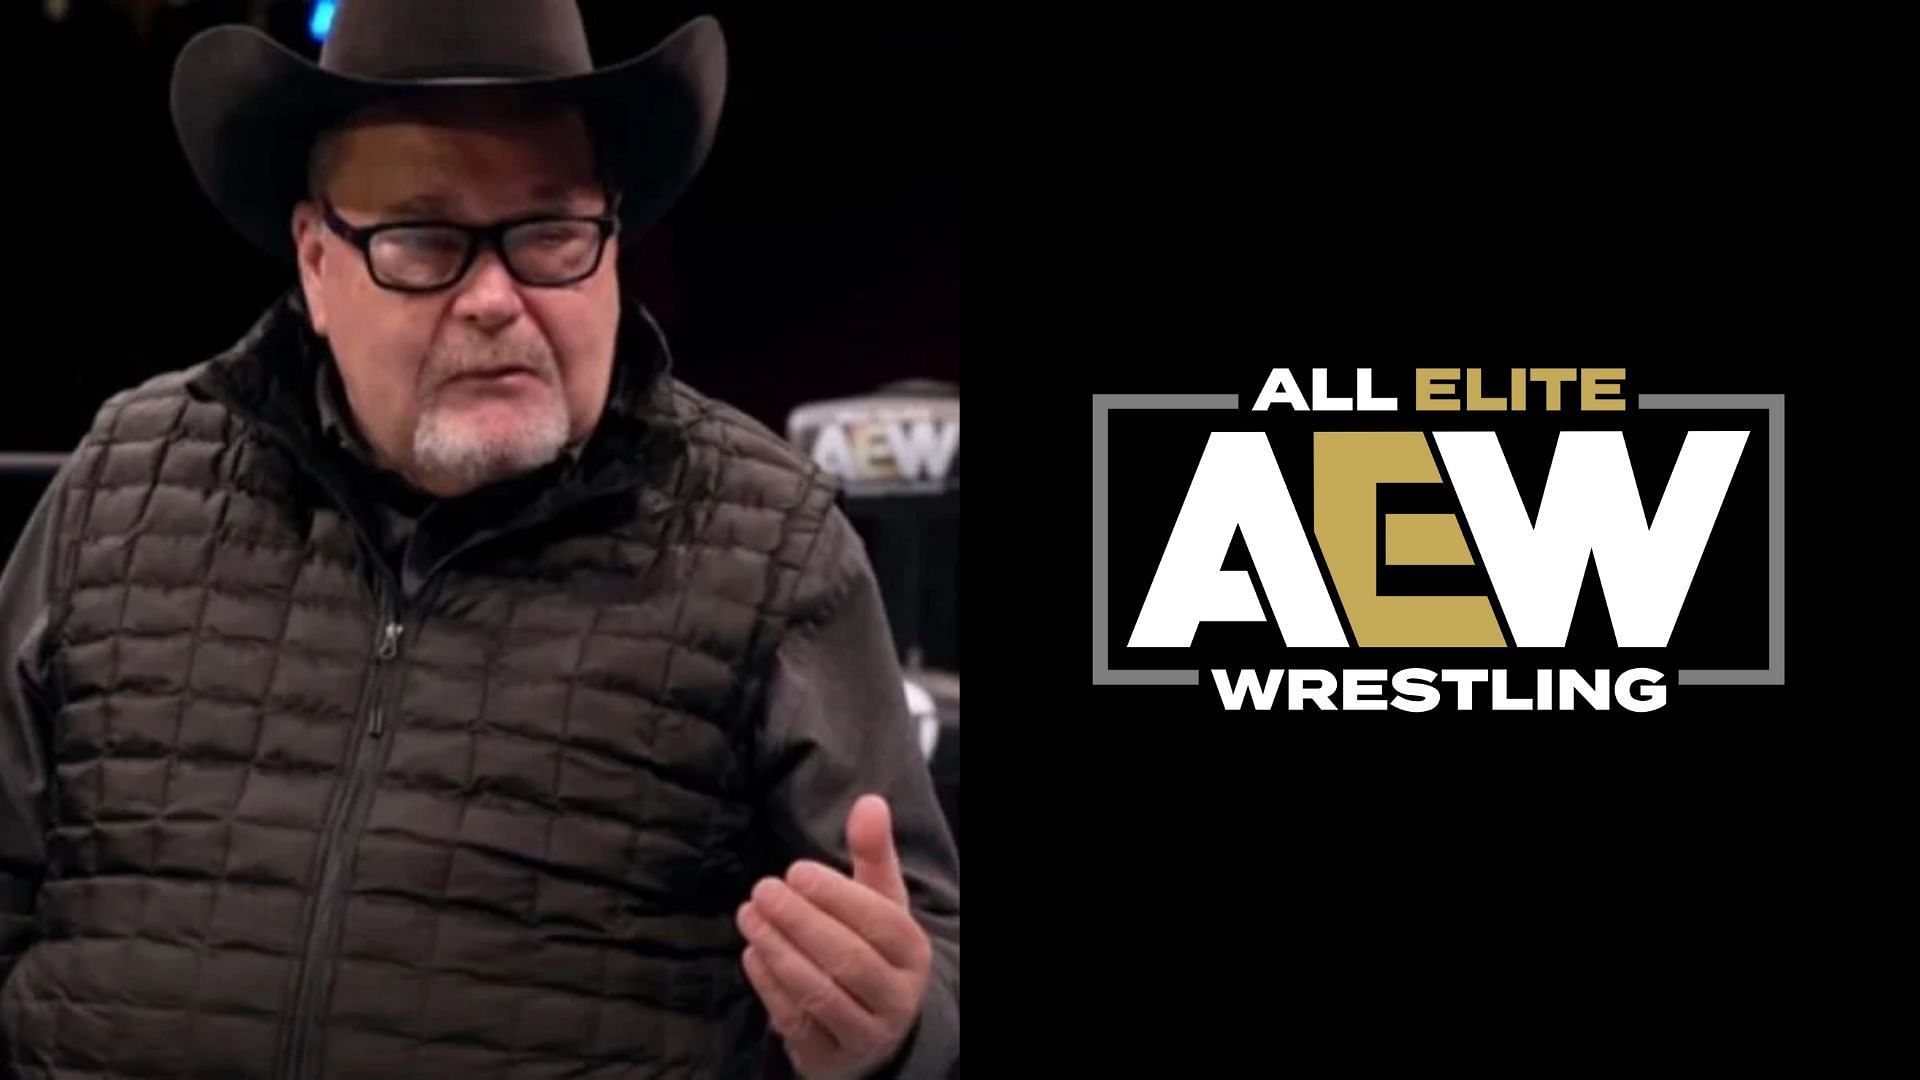 Jim Ross currently works as a commentator in AEW